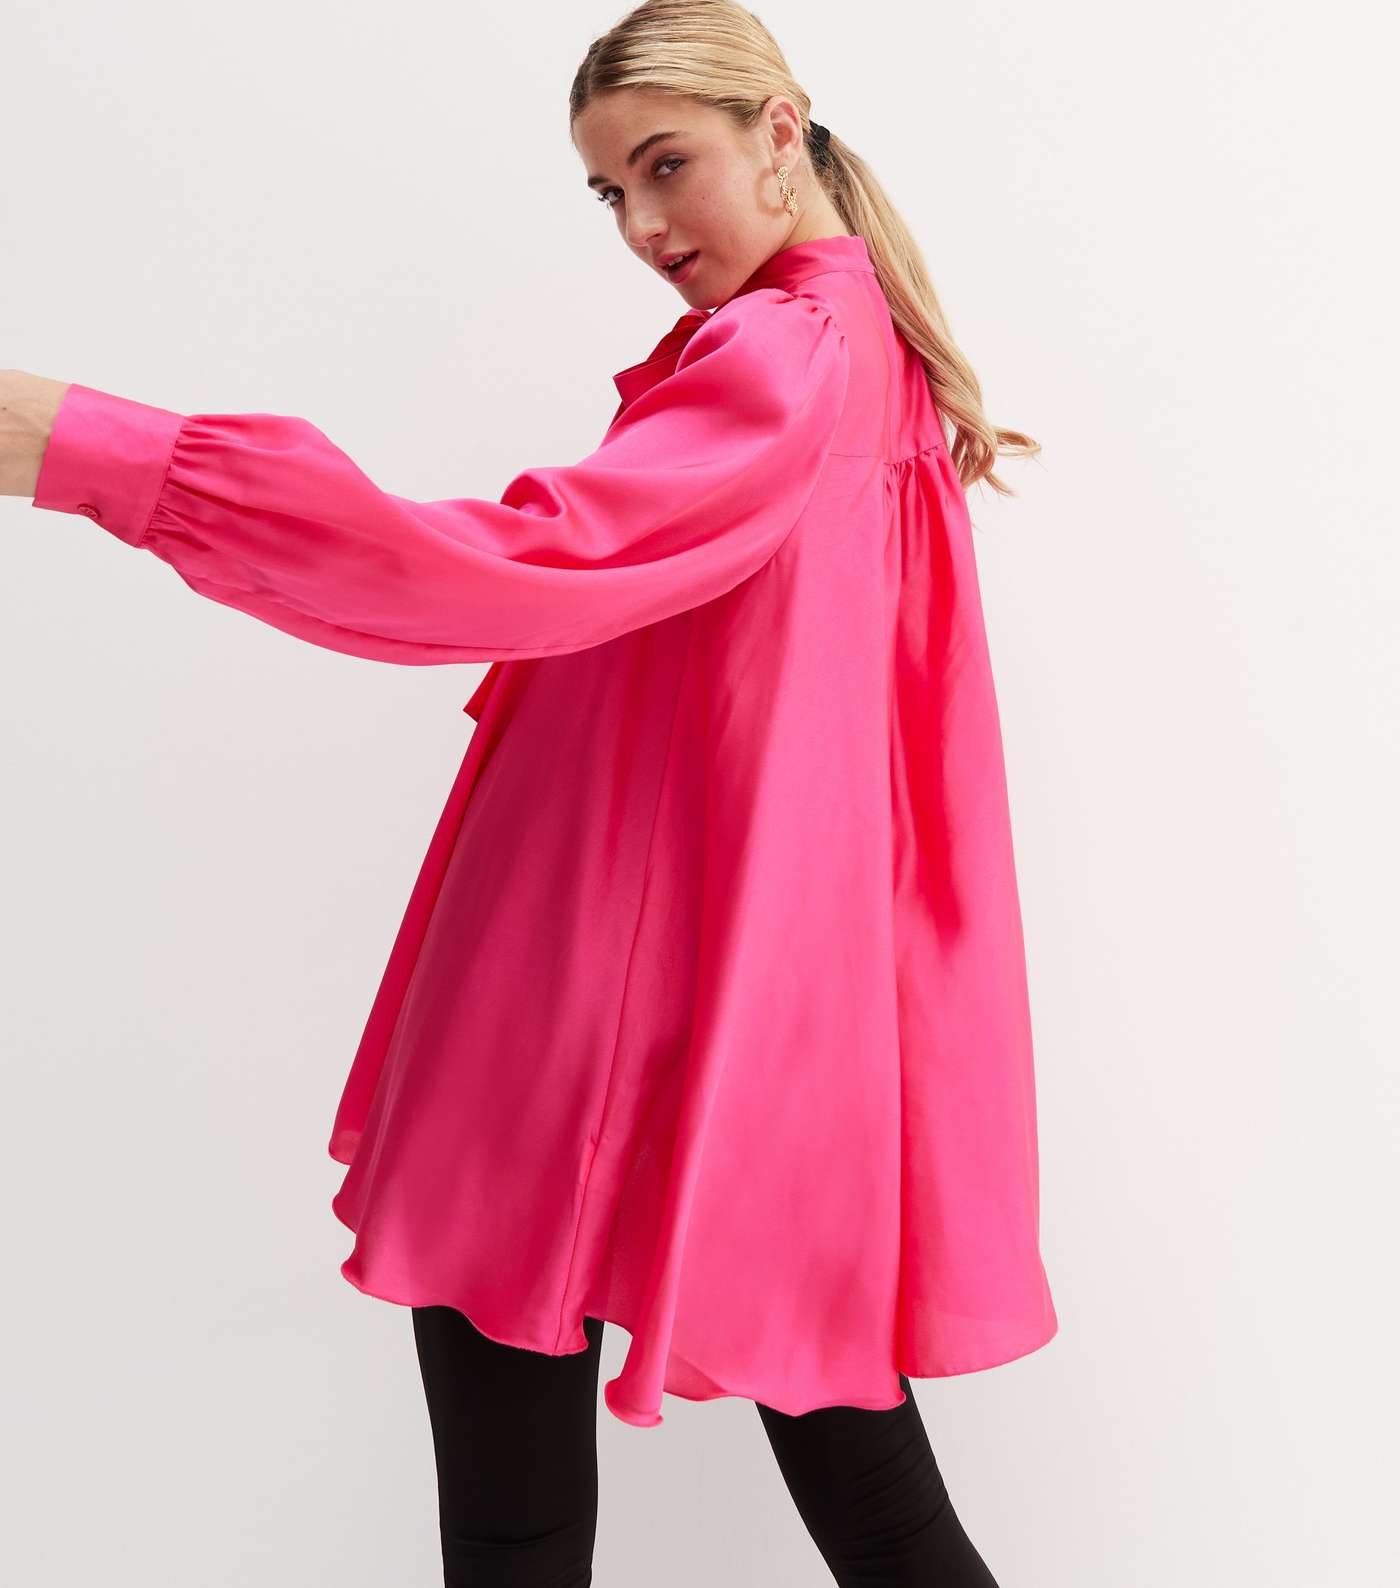 Bright Pink Satin Bow High Neck Long Sleeve Blouse Image 4